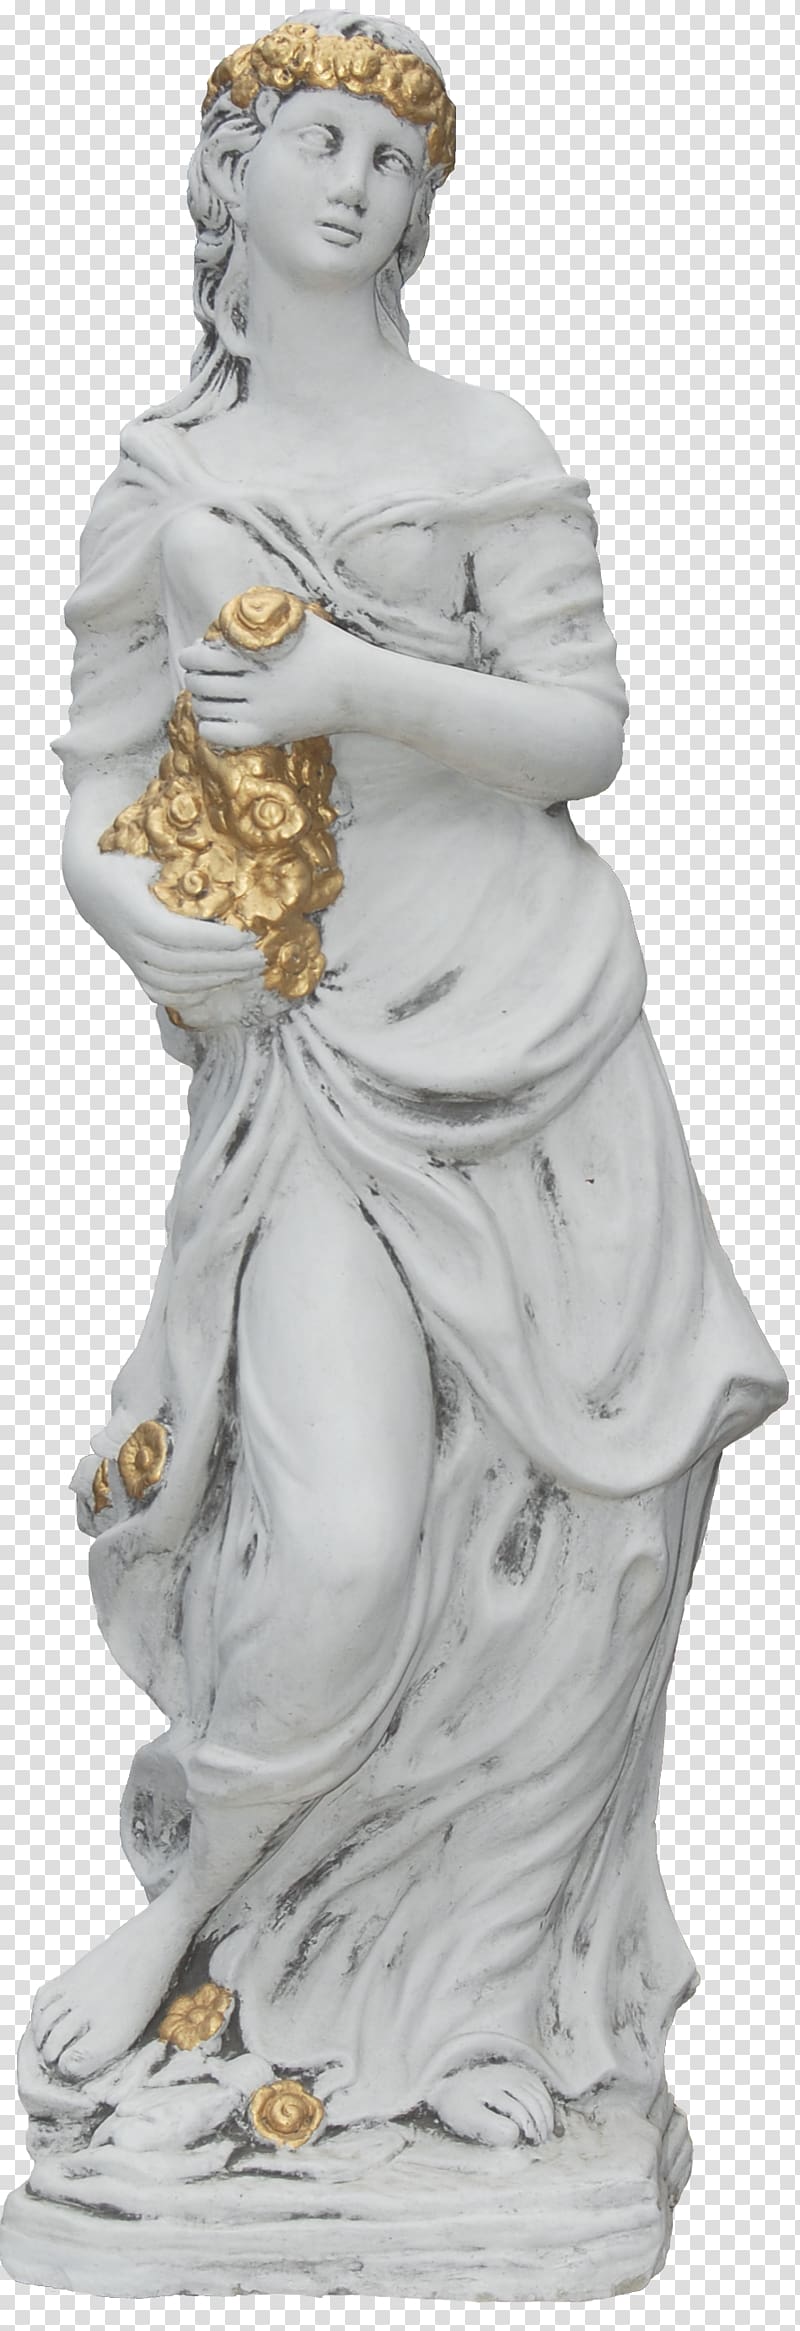 Classical sculpture Stone carving Statue Monument, statue of liberty transparent background PNG clipart